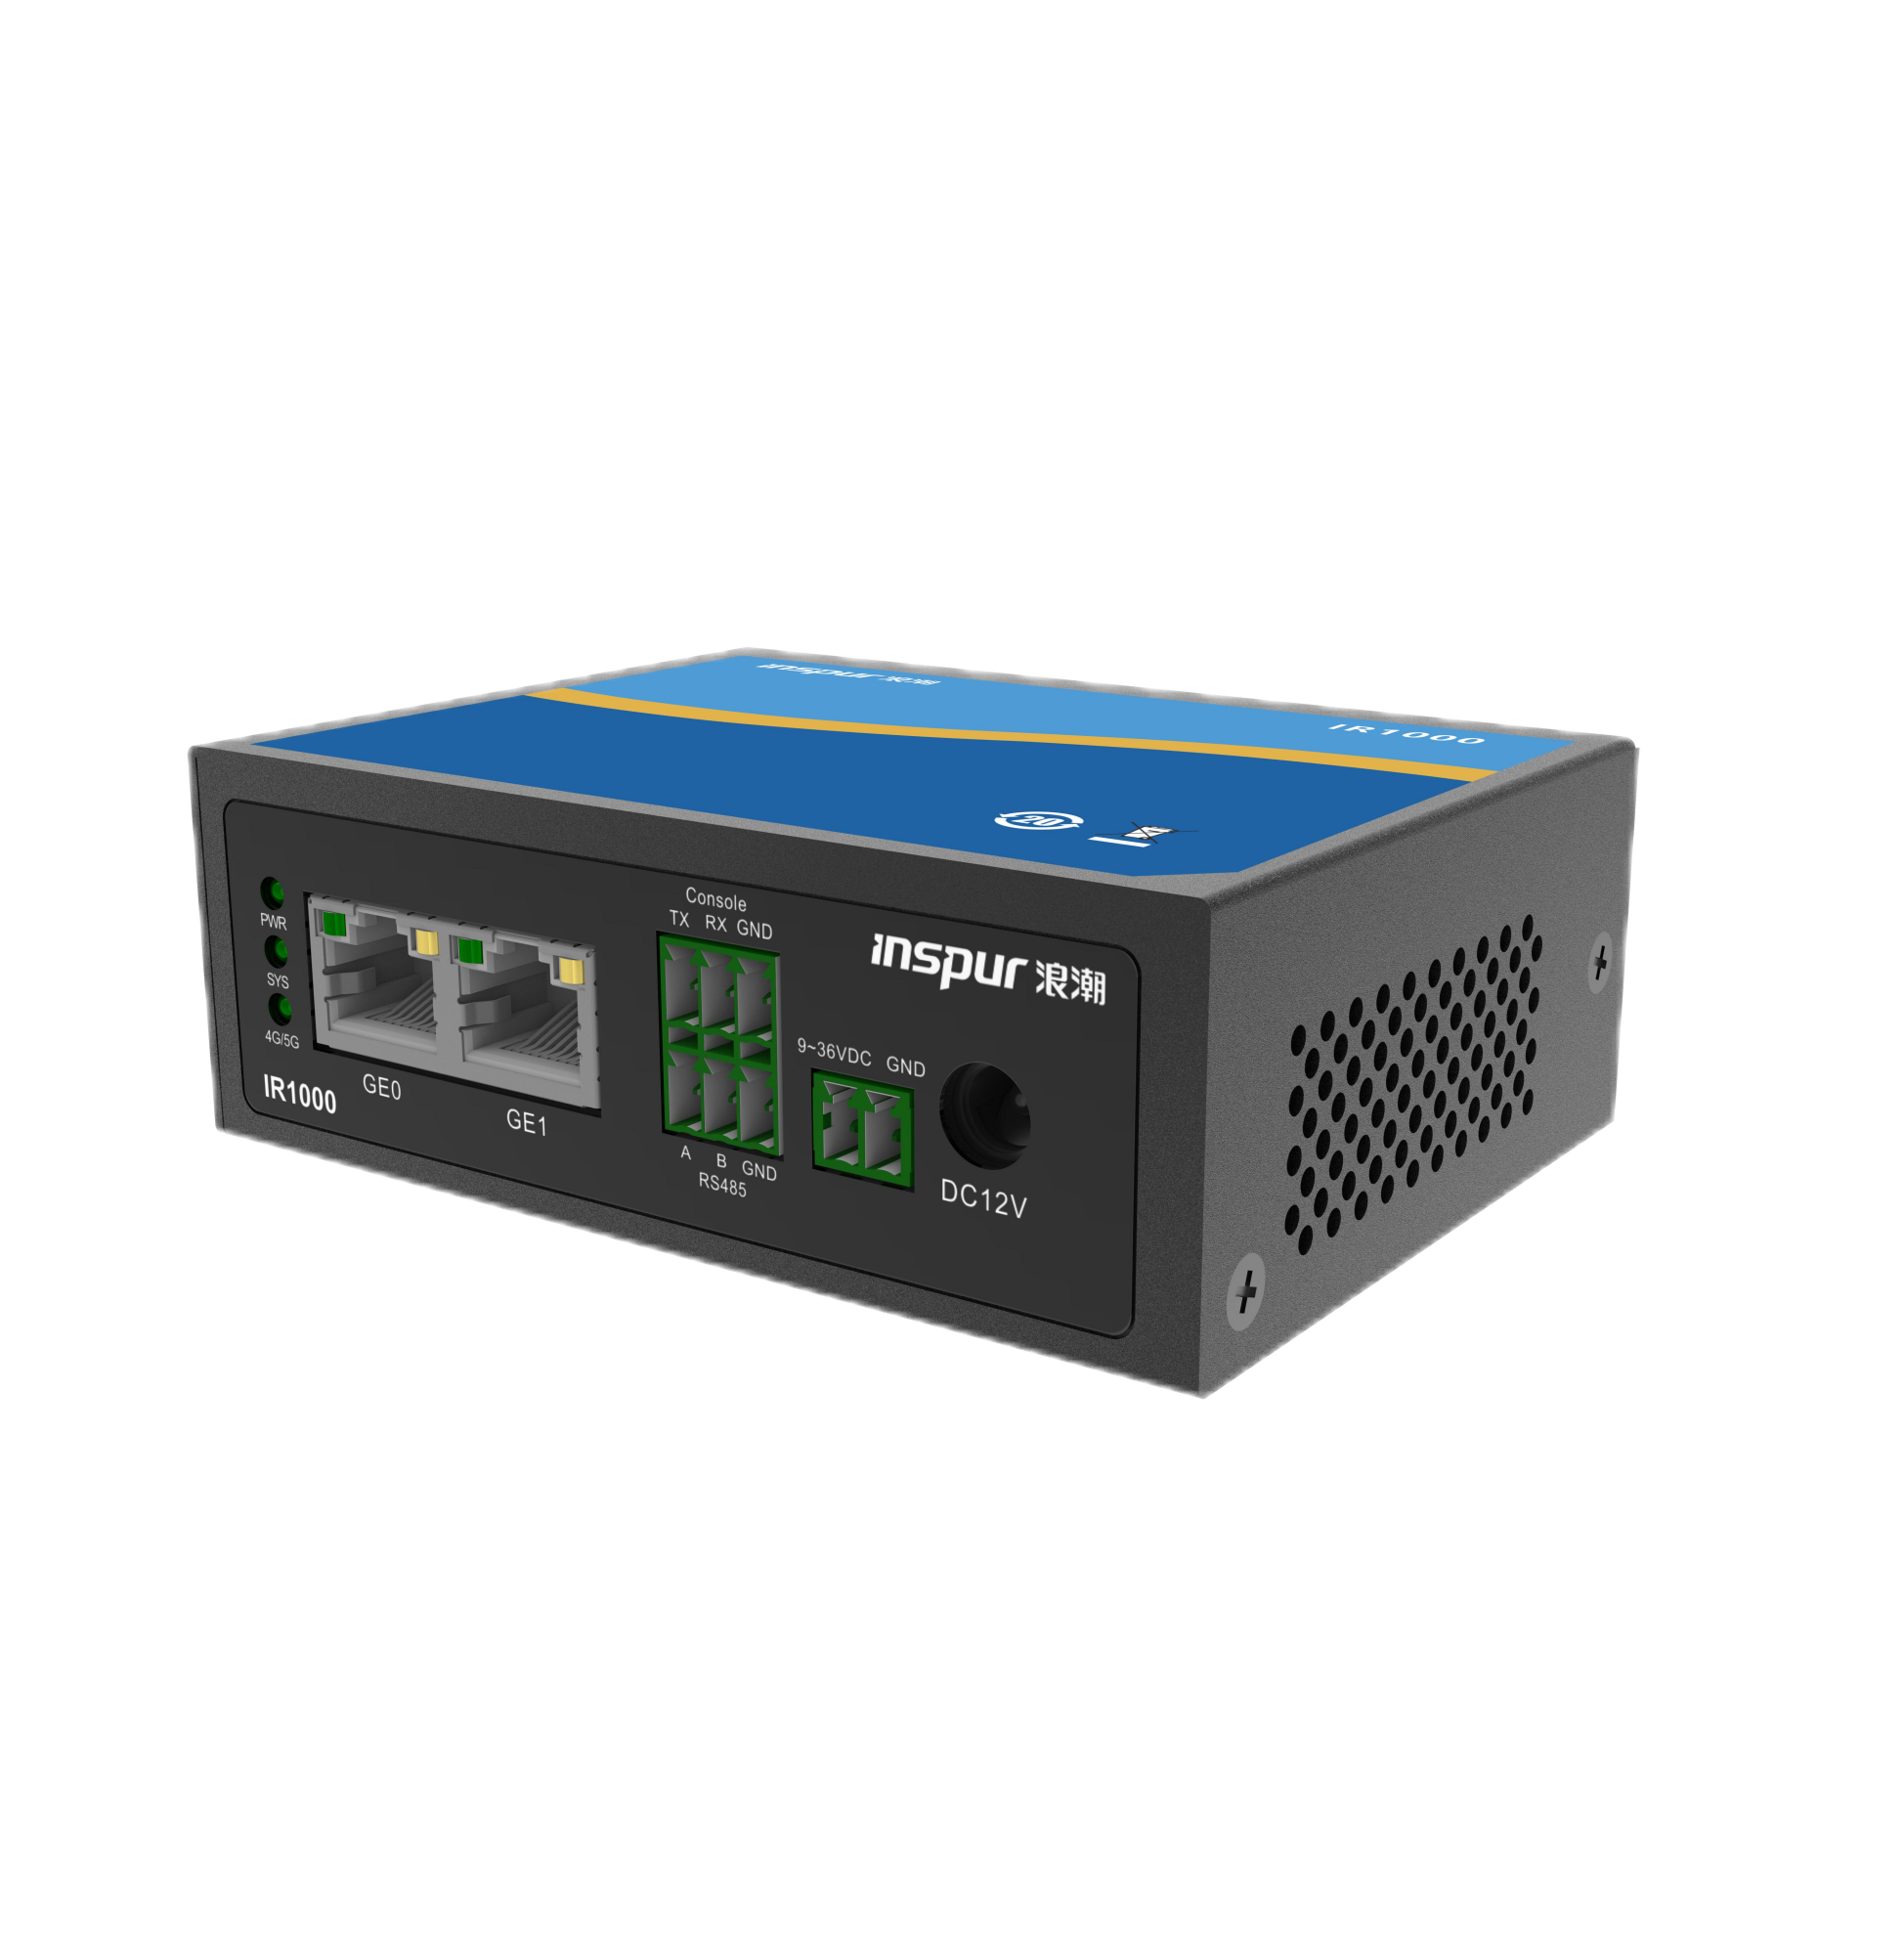 Router industrial 5G-IR1000